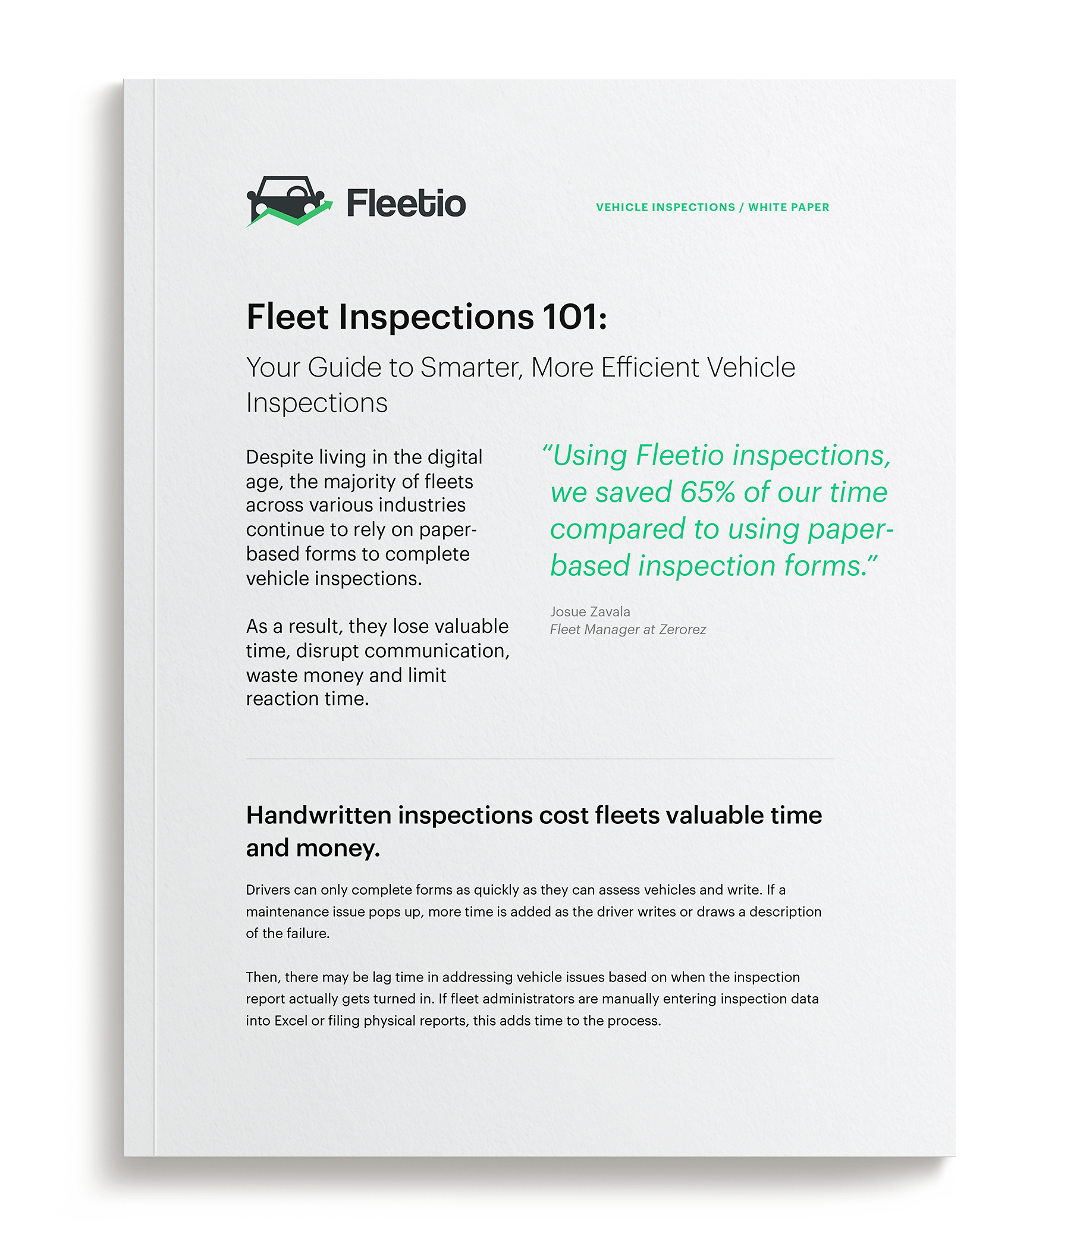 Fleet Inspections 101: A Guide to Smarter Inspections